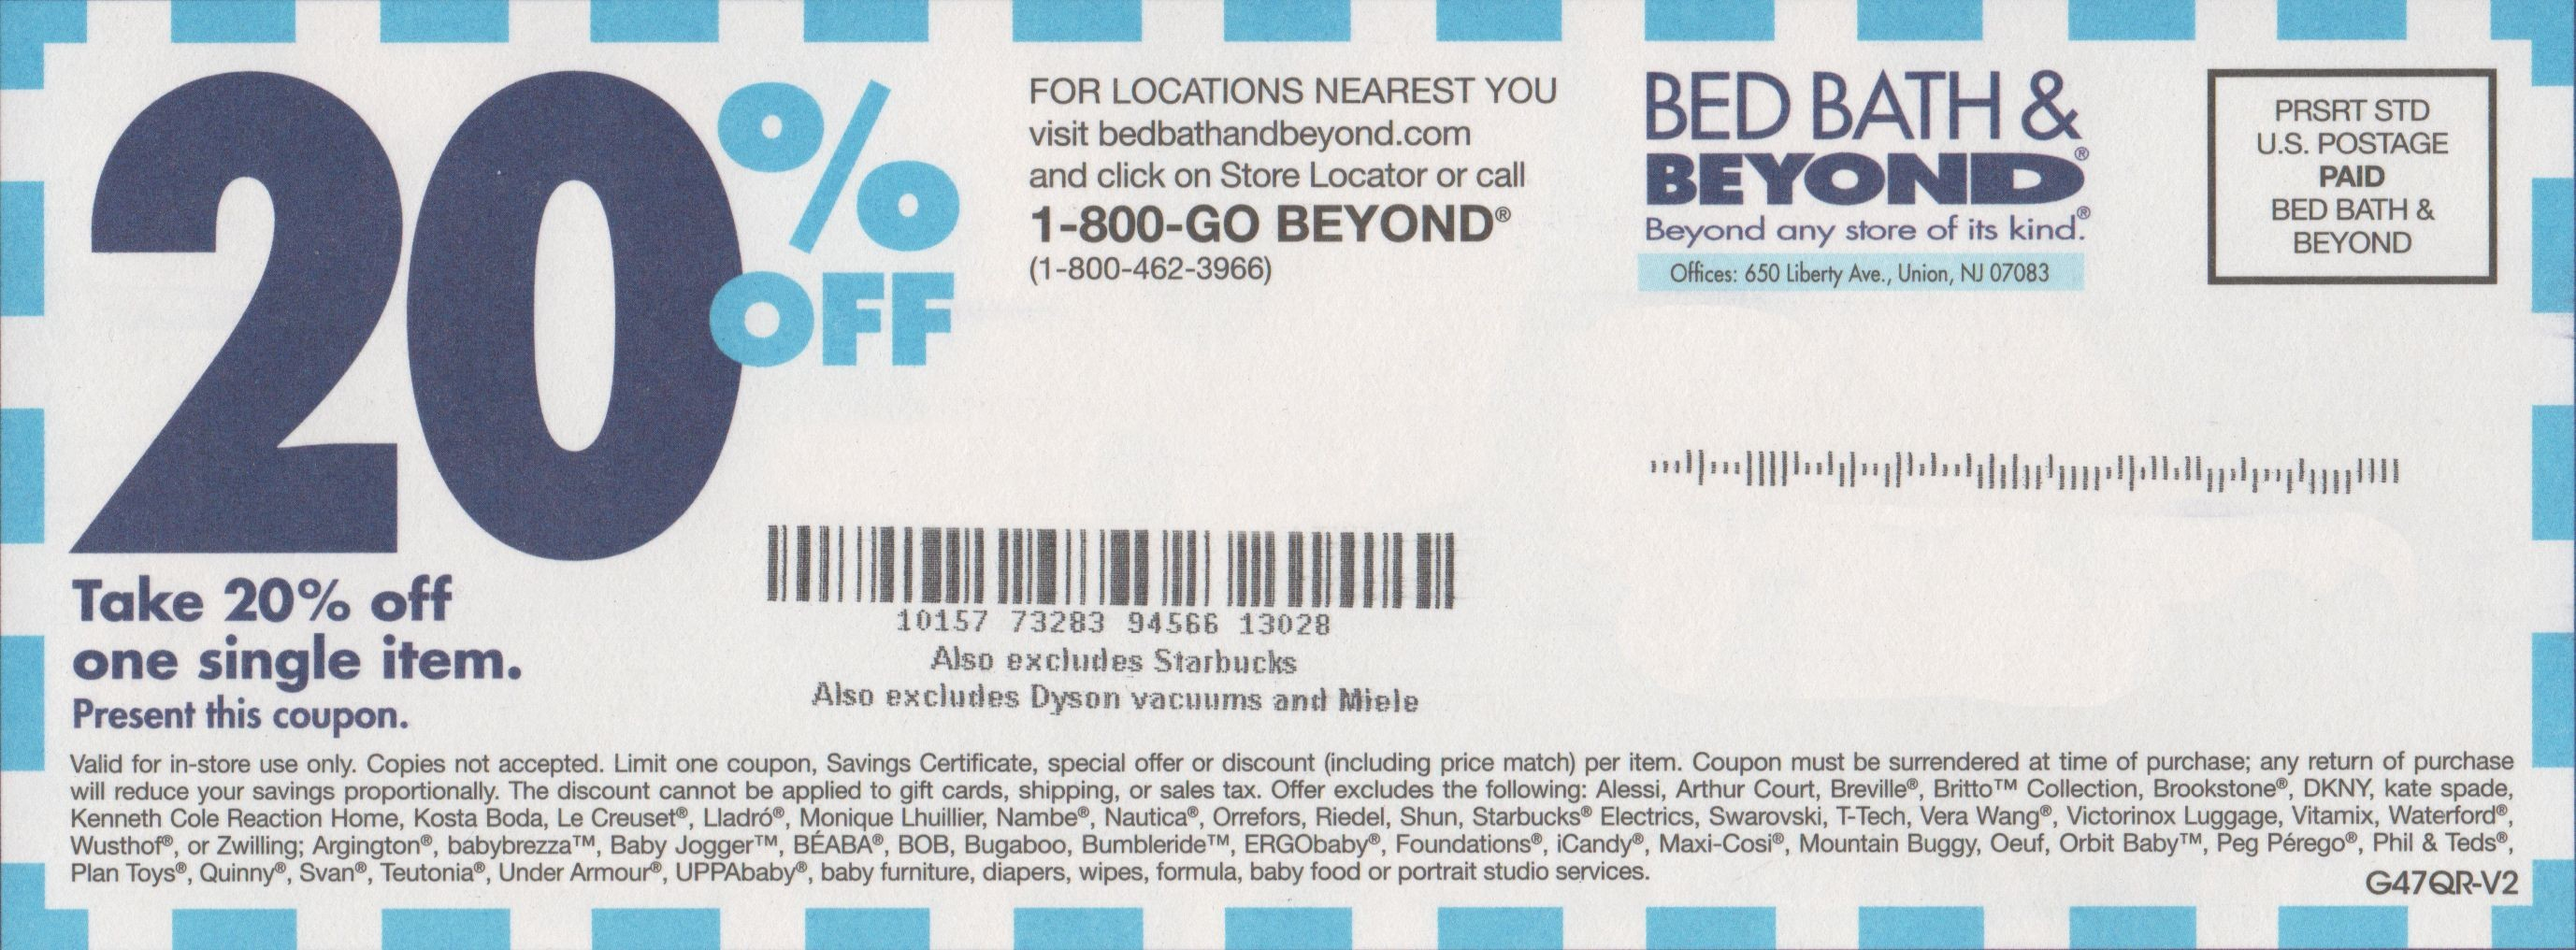 Google Images Bed Bath And Beyond Coupon | Working With Google Docs - Free Printable Bed Bath And Beyond Coupon 2019